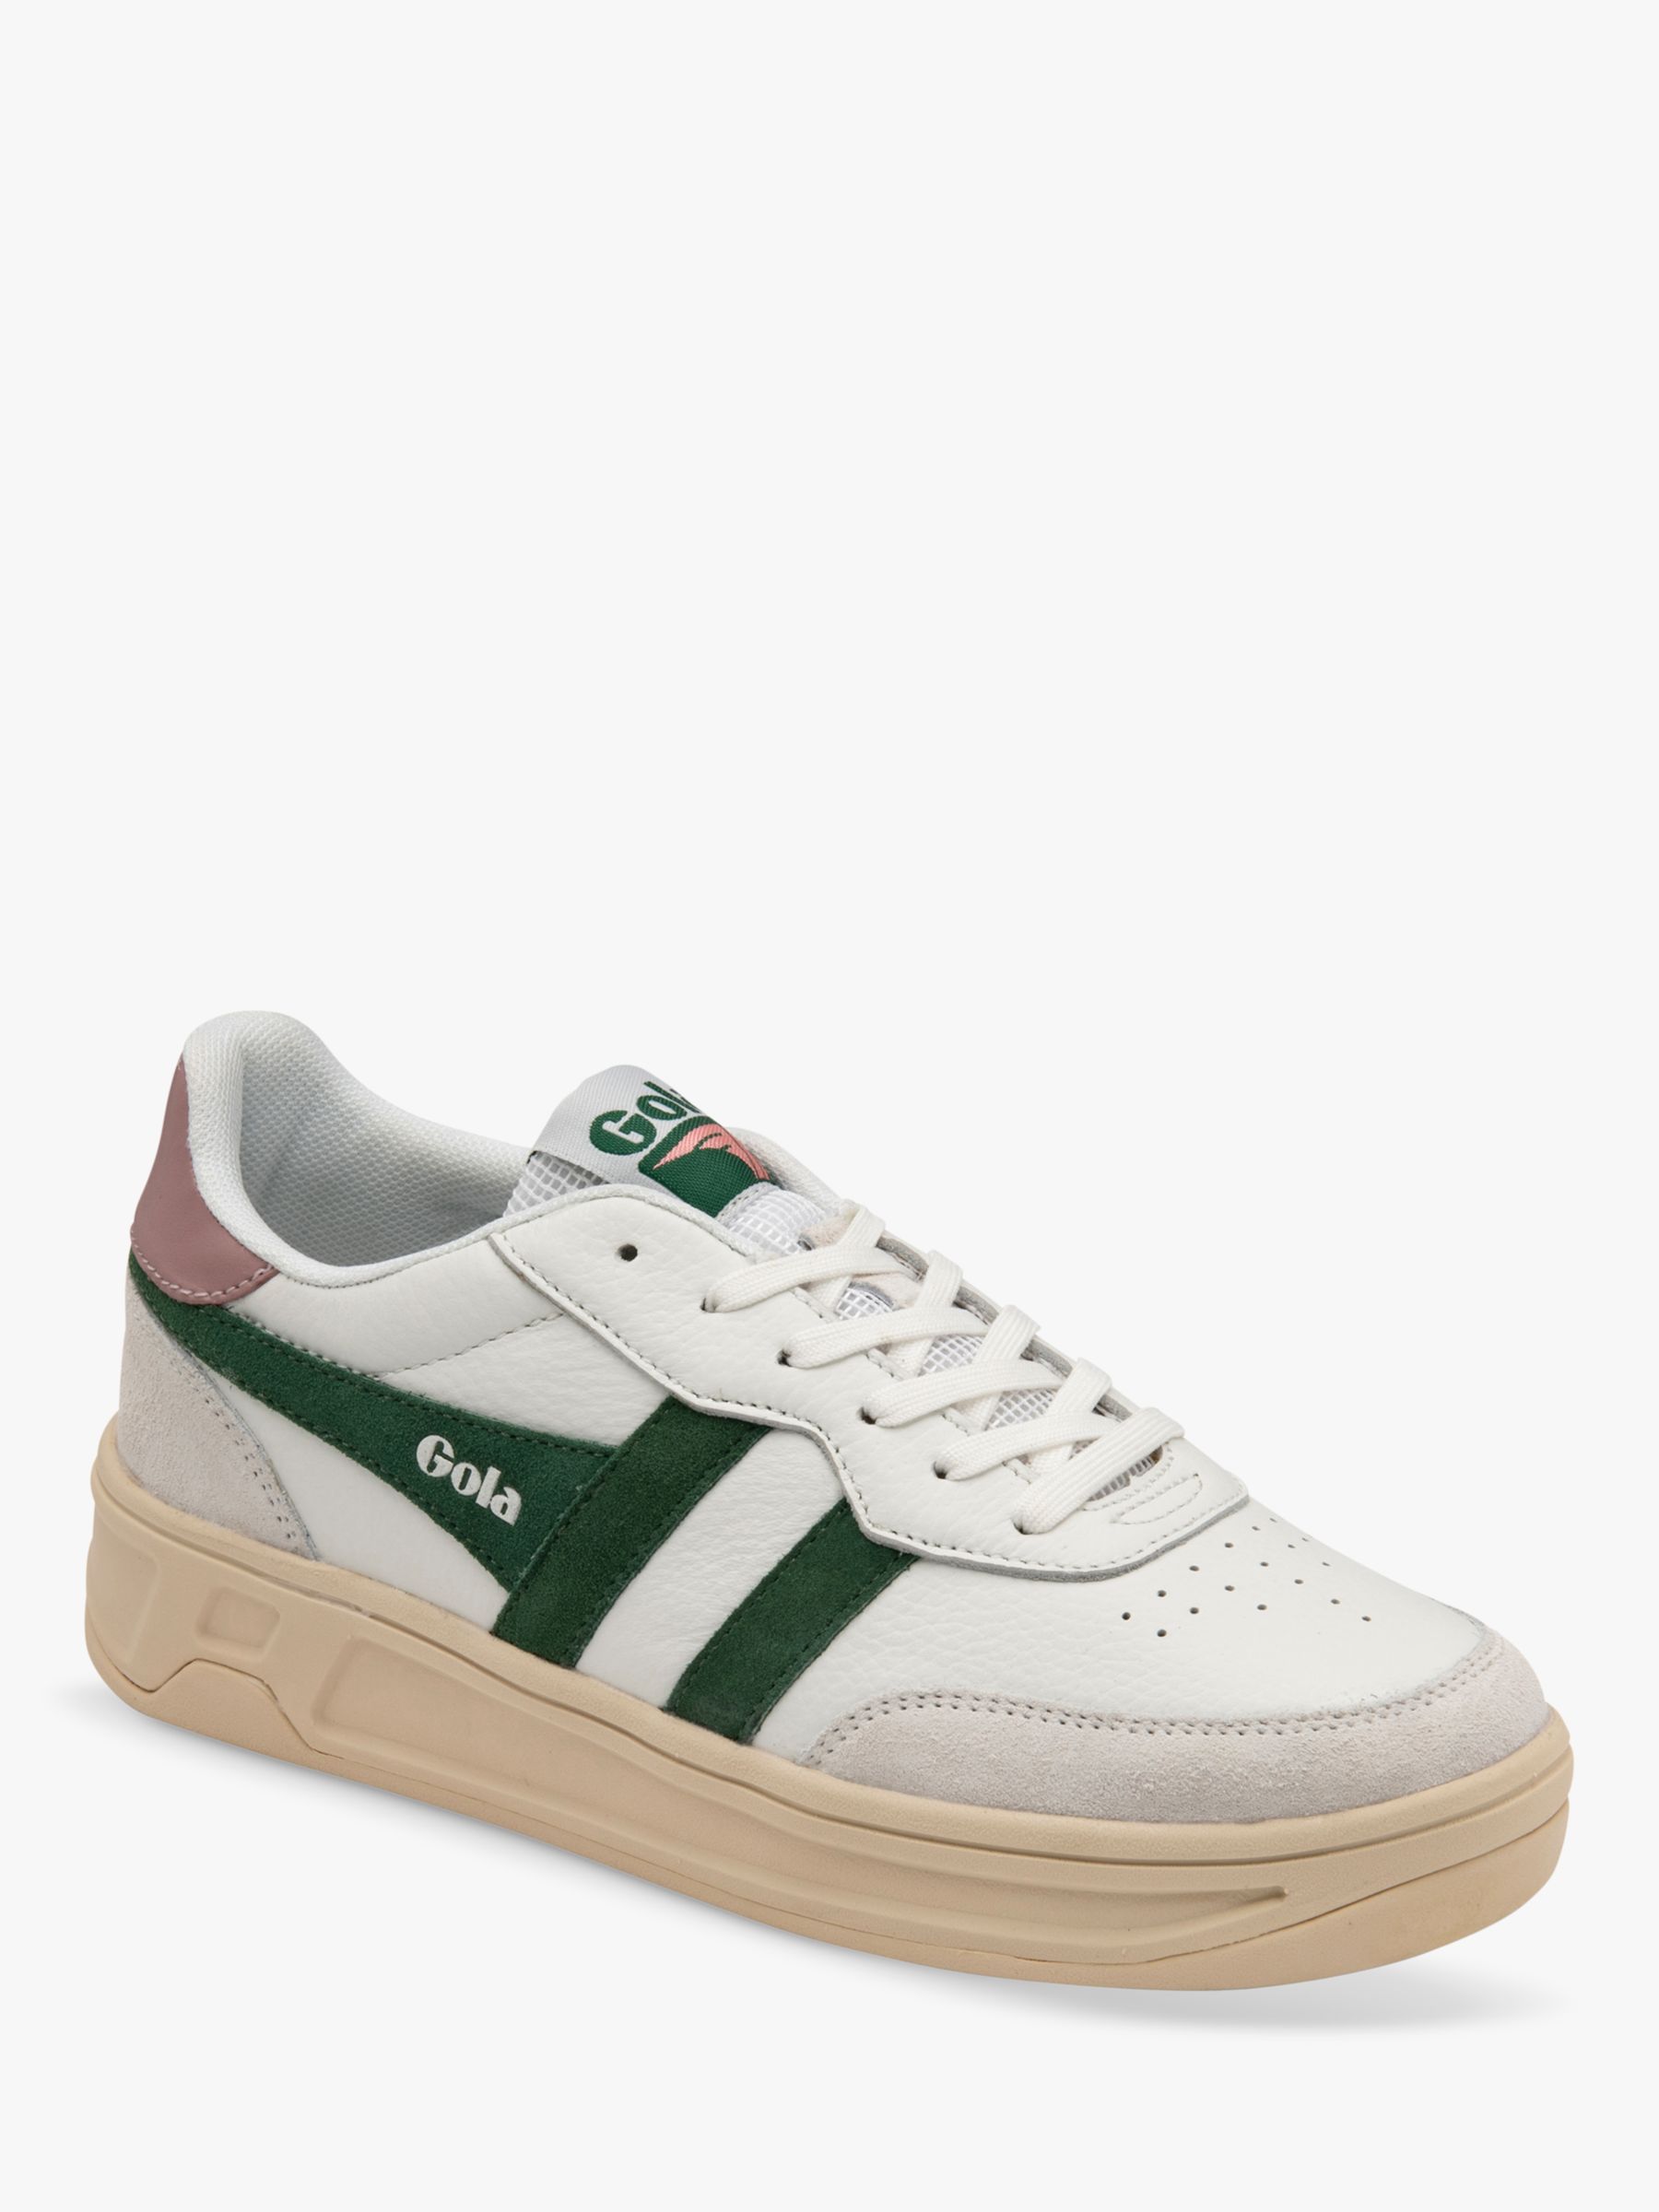 Buy Gola Classics Topspin Leather Lace Up Trainers Online at johnlewis.com